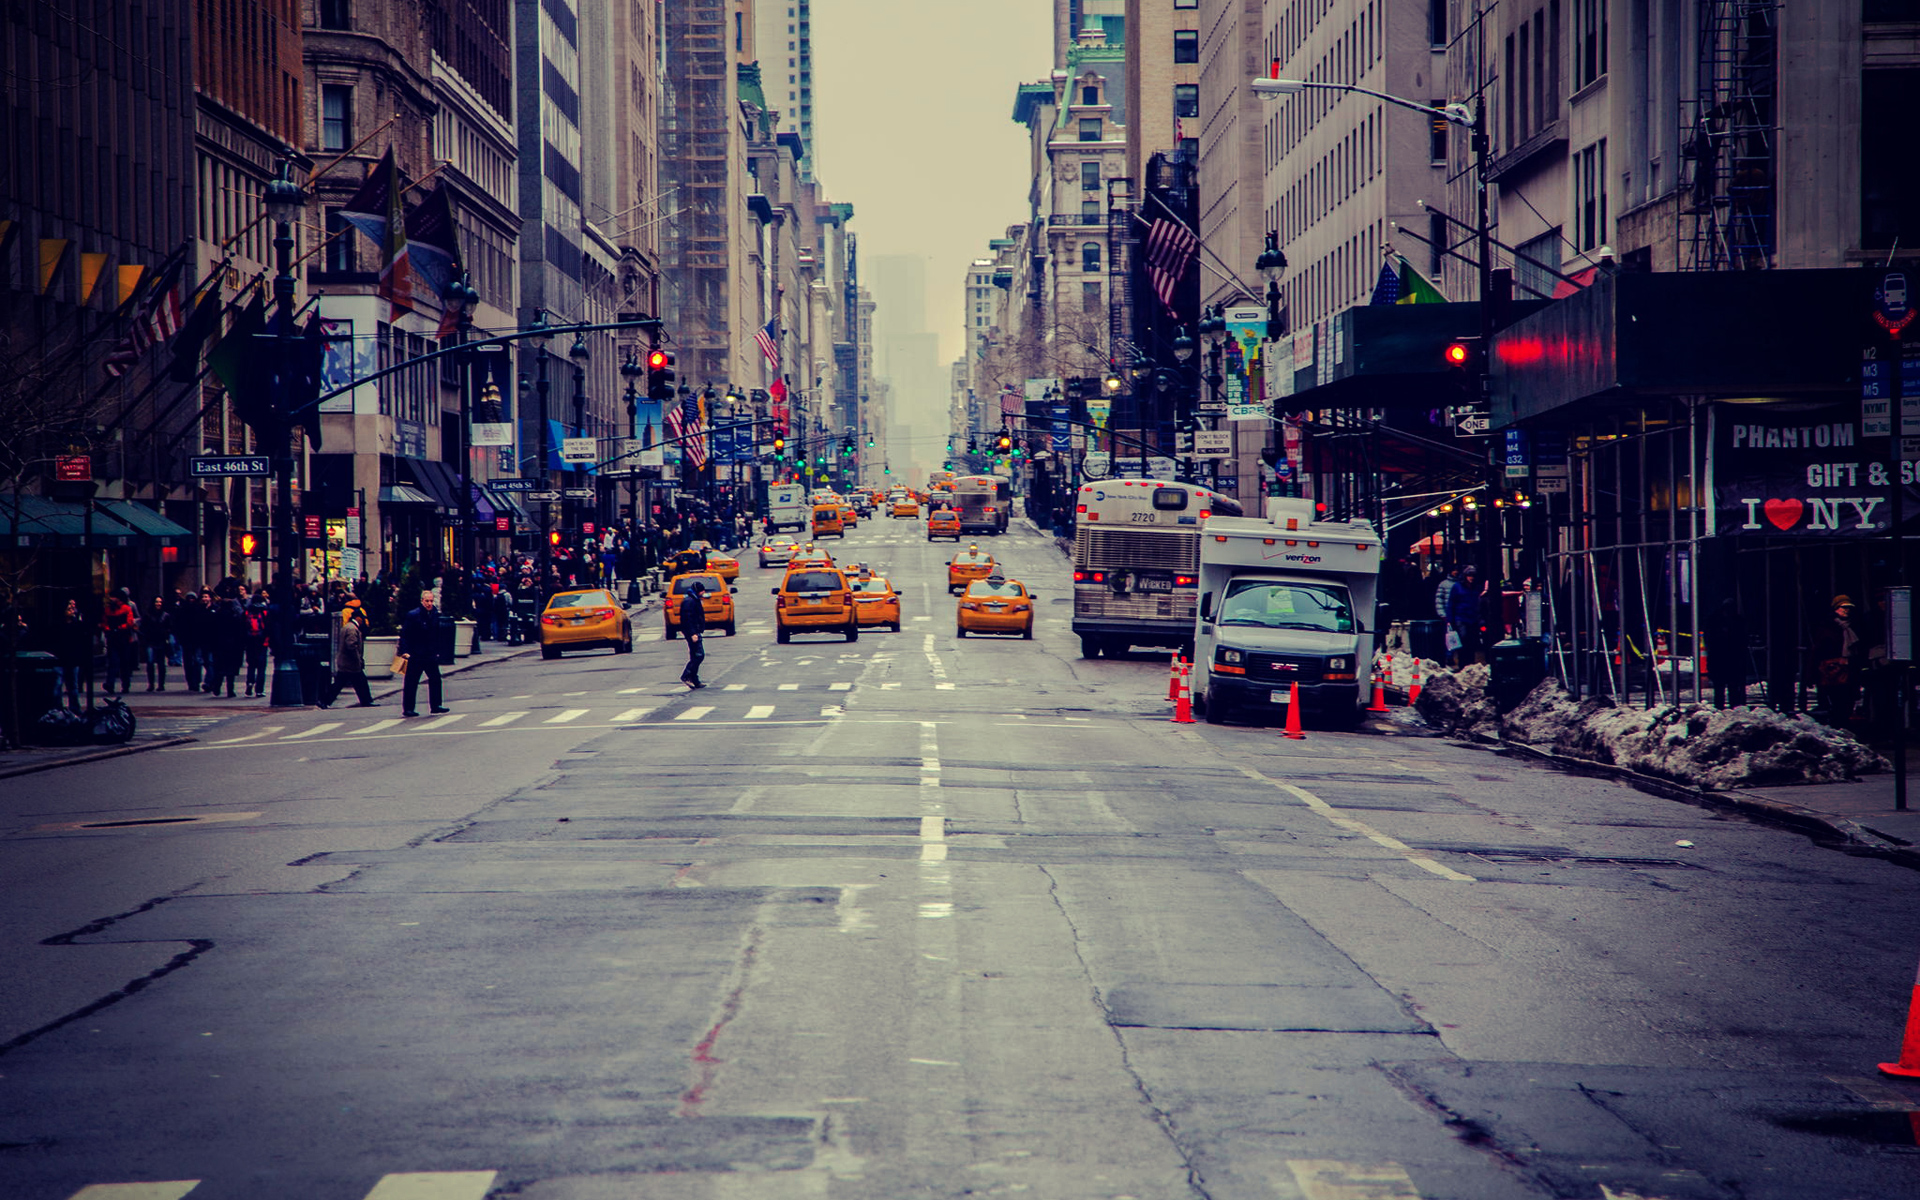 usa, man made, new york, building, city, street, taxi for android